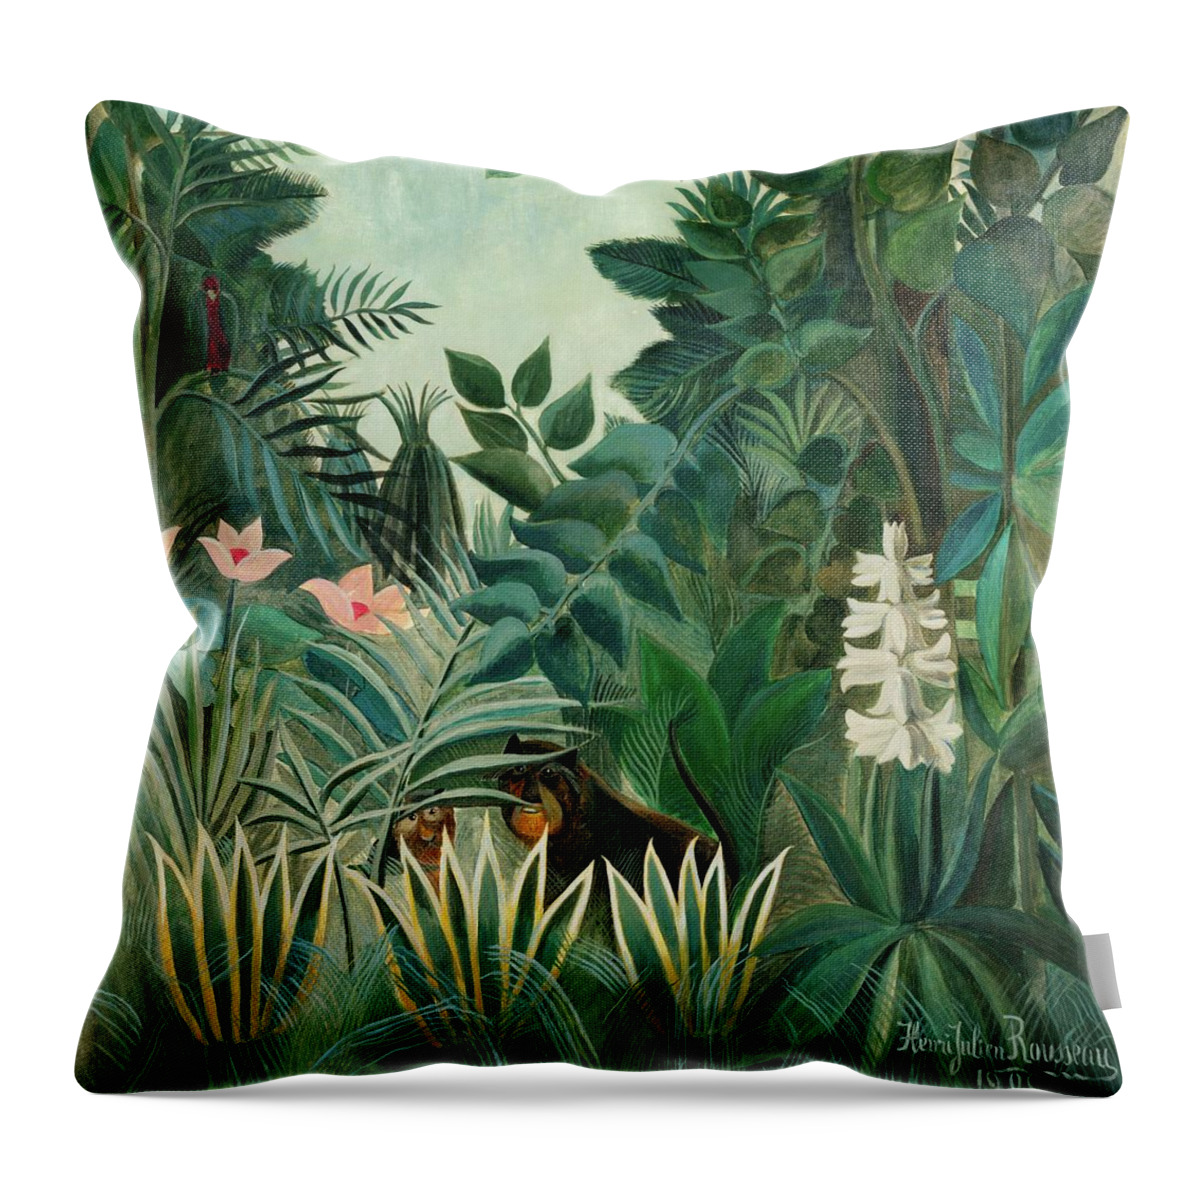 Equatorial Jungle Throw Pillow featuring the painting The Equatorial Jungle 1909 #1 by Henri Rousseau